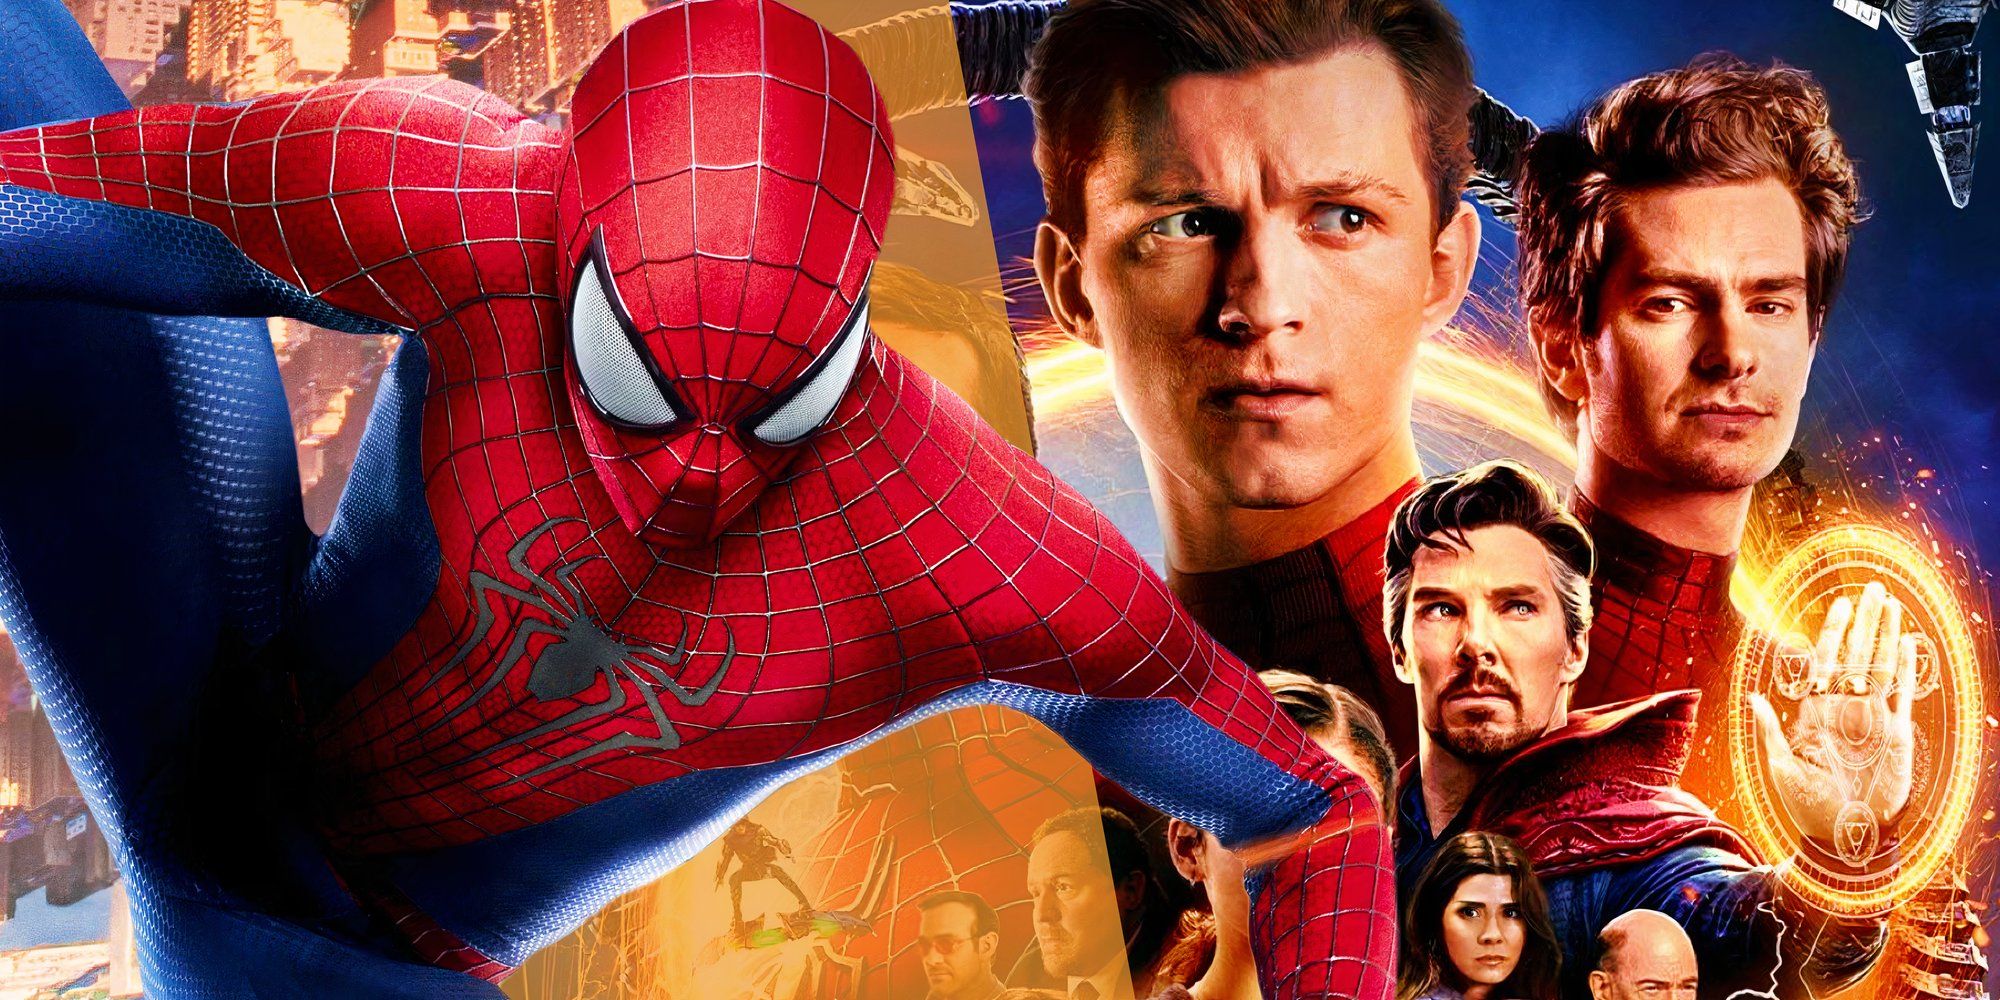 The poster for Spider-Man: No Way Home (2021) next to Andrew Garfield as Spider-Man in The Amazing Spider-Man 2 (2014)